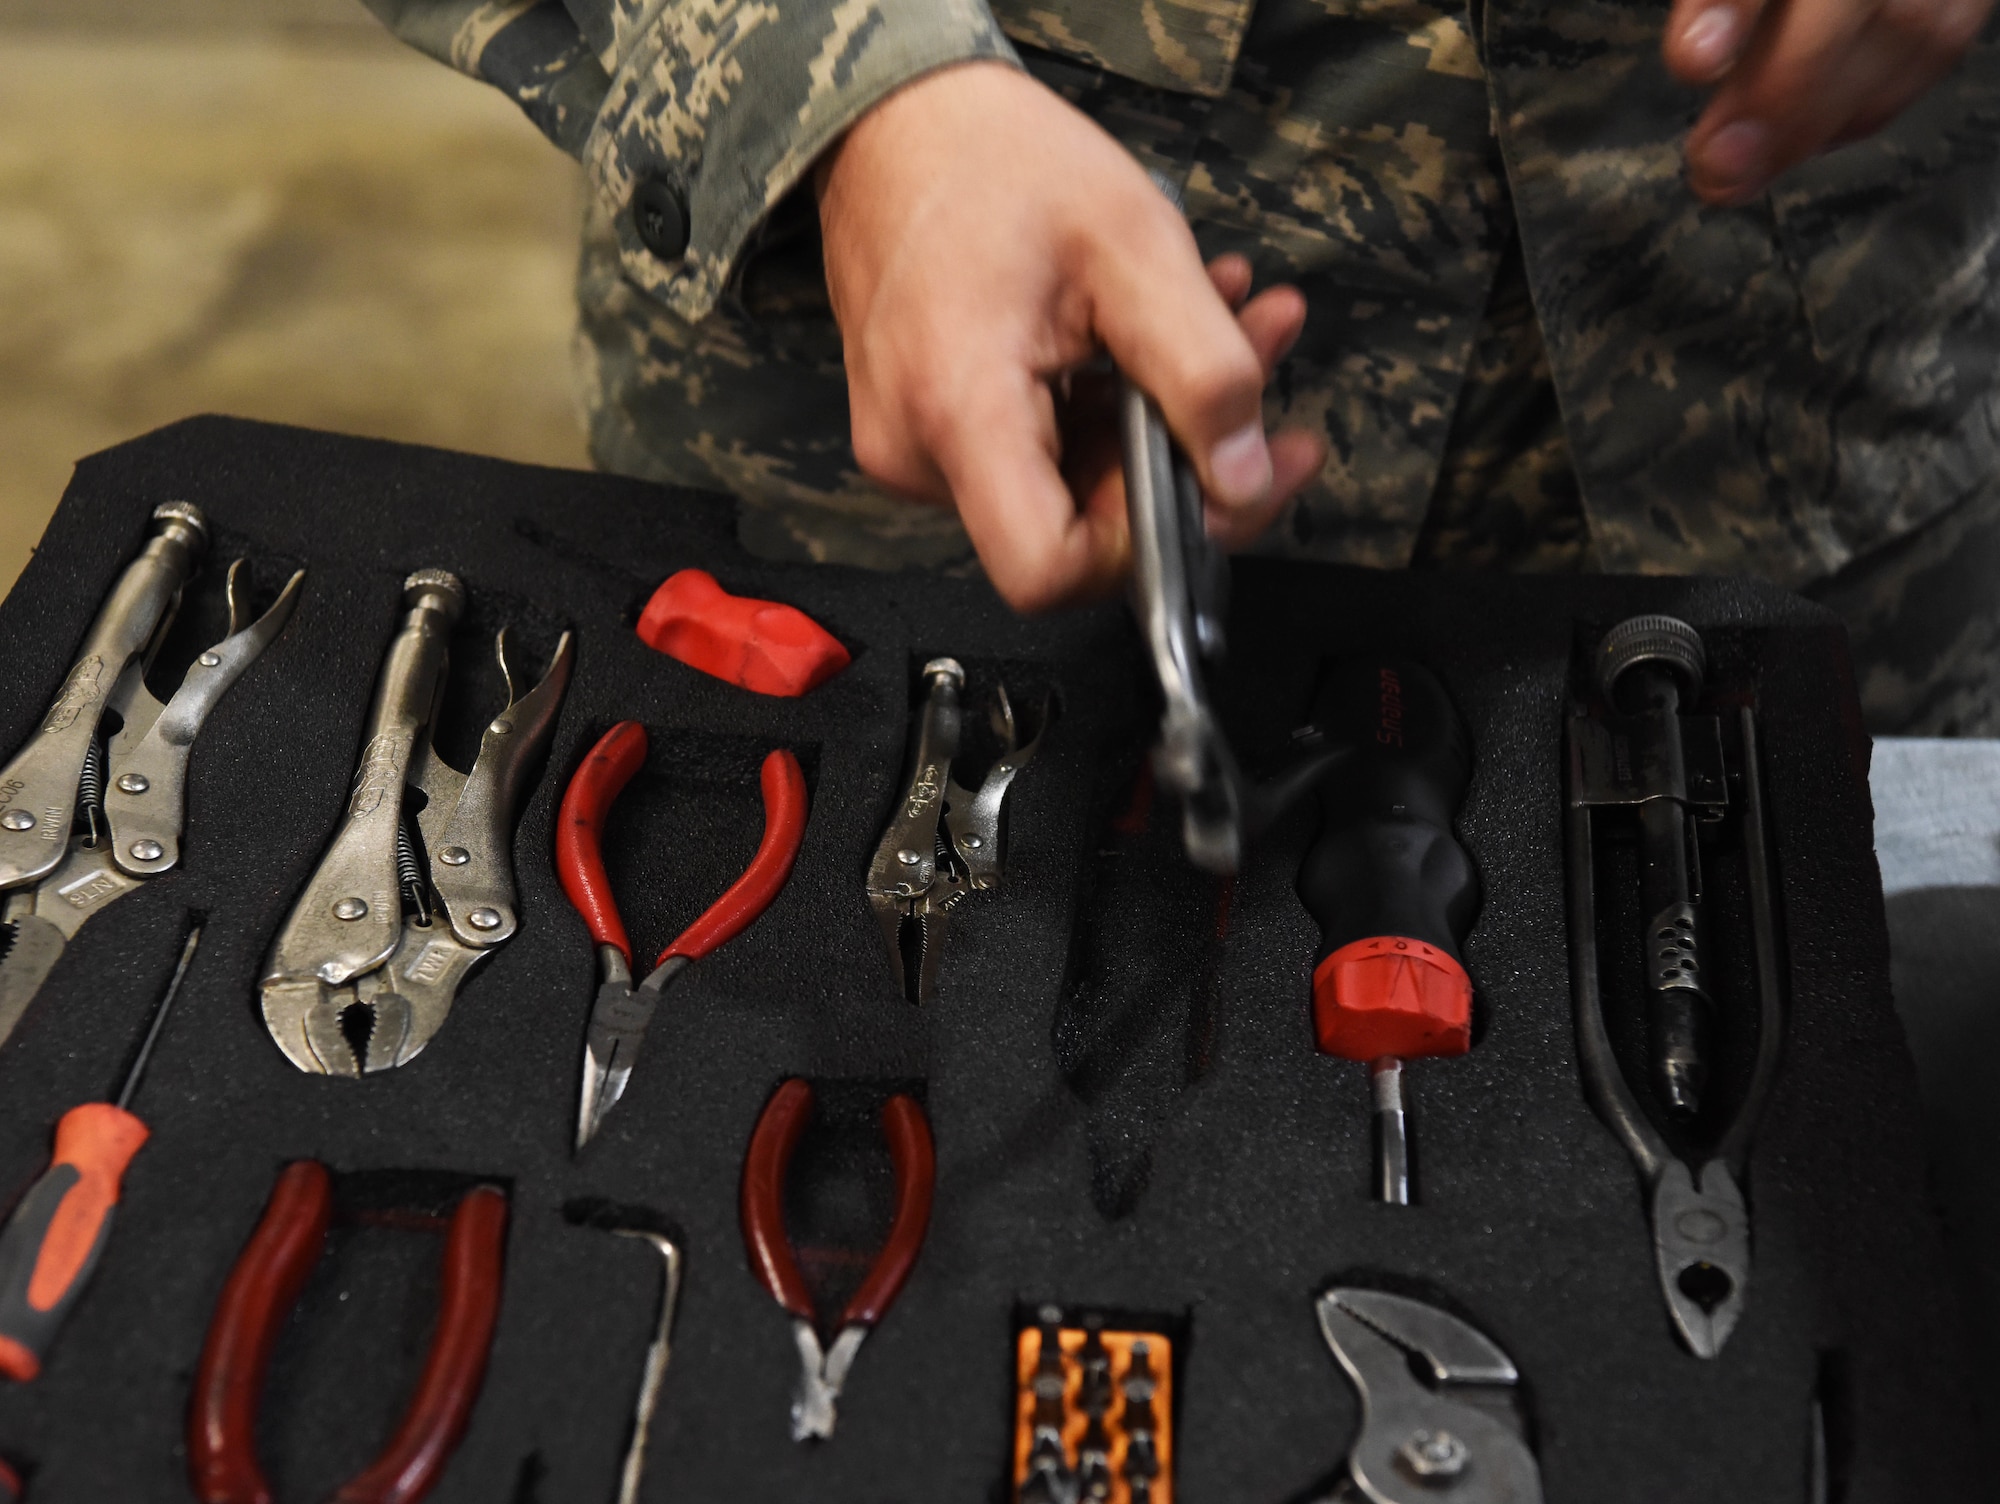 Airman 1st Class Casey Pelt, a 28th Aircraft Maintenance Squadron B-1 crew chief, checks out tools before he starts his shift at Ellsworth Air Force Base, S.D., Sept. 11, 2018. The 28th Maintenance Squadron tool crib maintains, distributes and accounts for a multitude of equipment used by Airmen in the 37th and 34th Bomb Squadrons for maintenance and repair of the base’s fleet of B-1s. (U.S. Air Force photo by Airman 1st Class Thomas Karol)